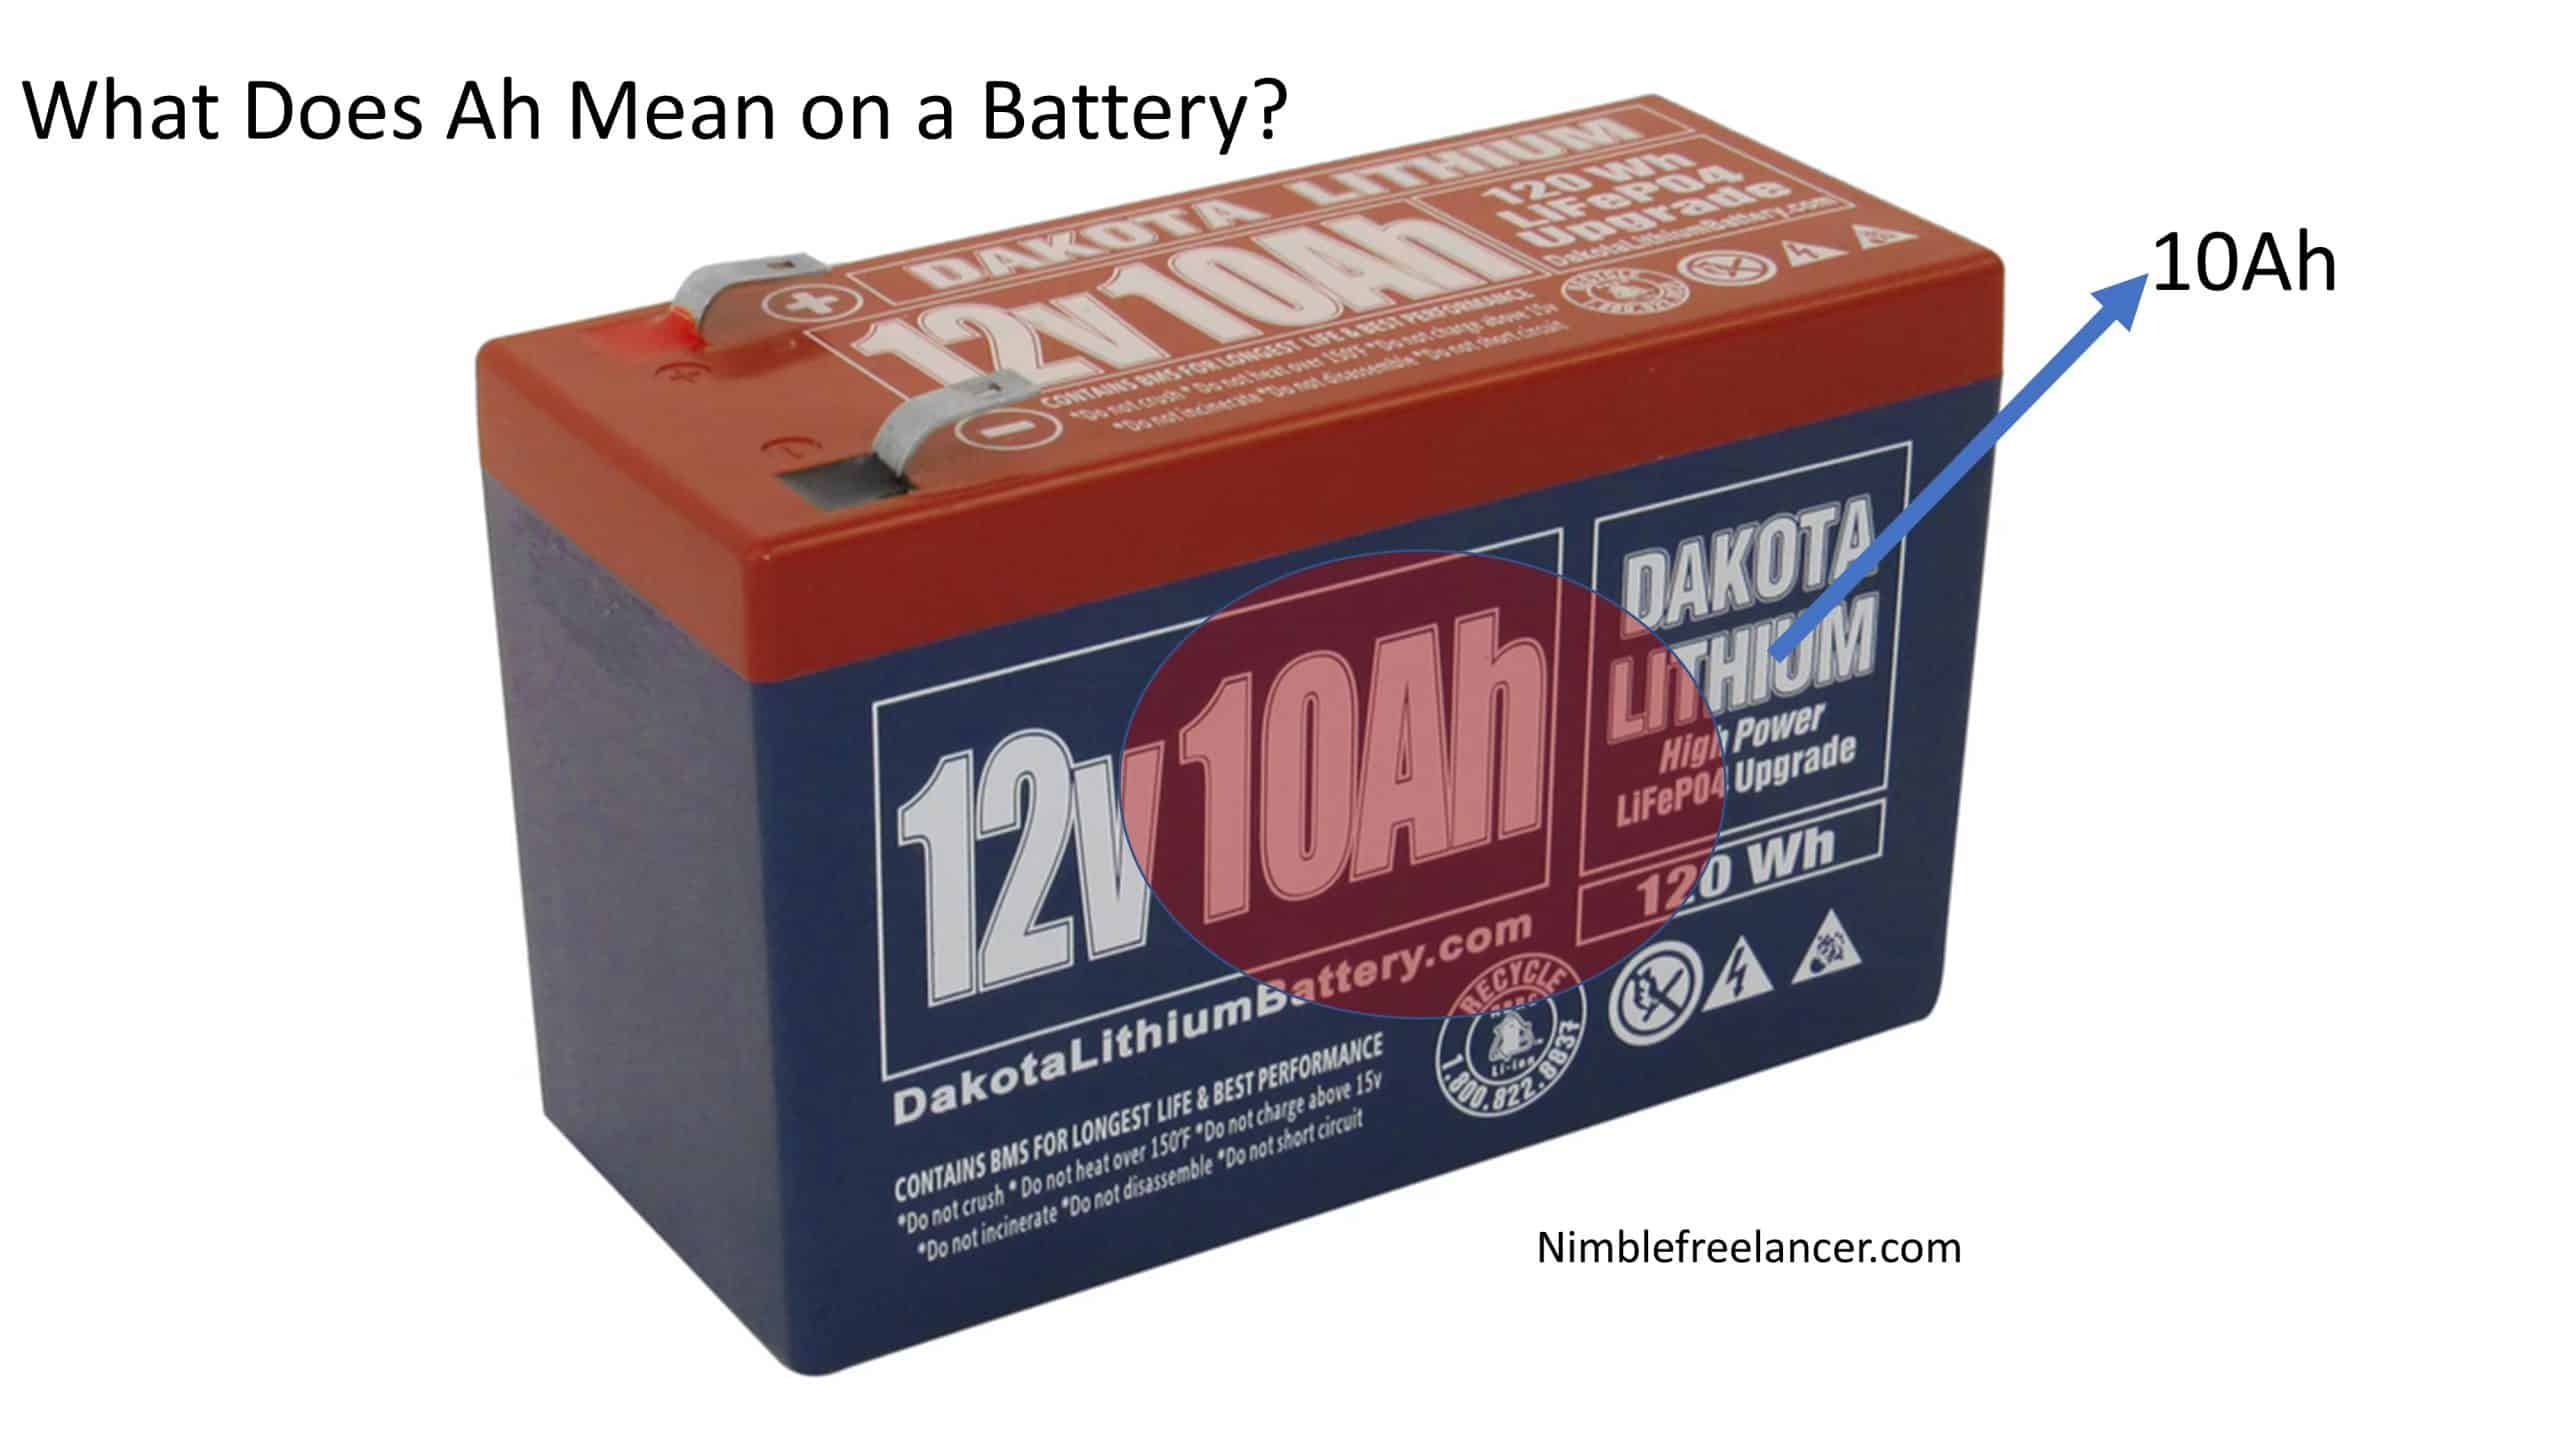 What Does Ah Mean on a Battery